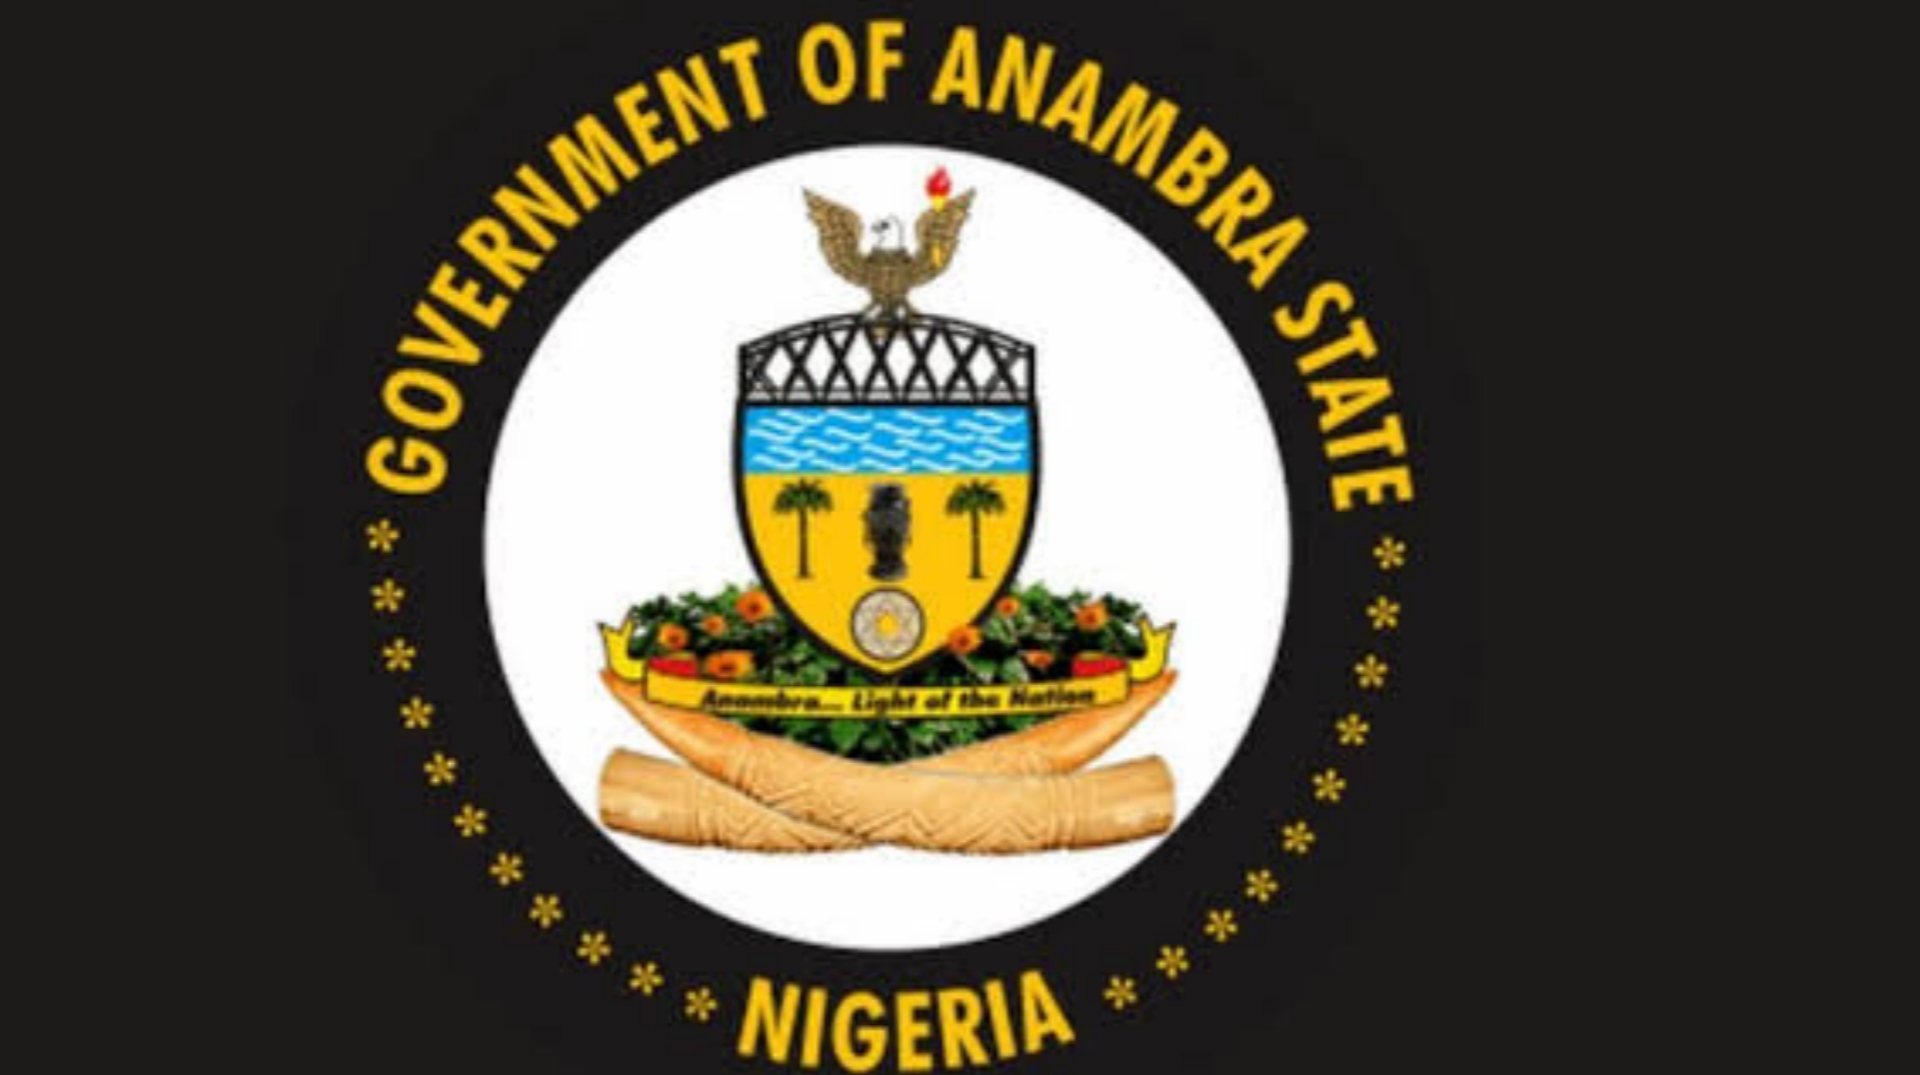 www.anambraministryofeducation.com – Anambra State Teachers Shortlisted Candidates List 2022/2023